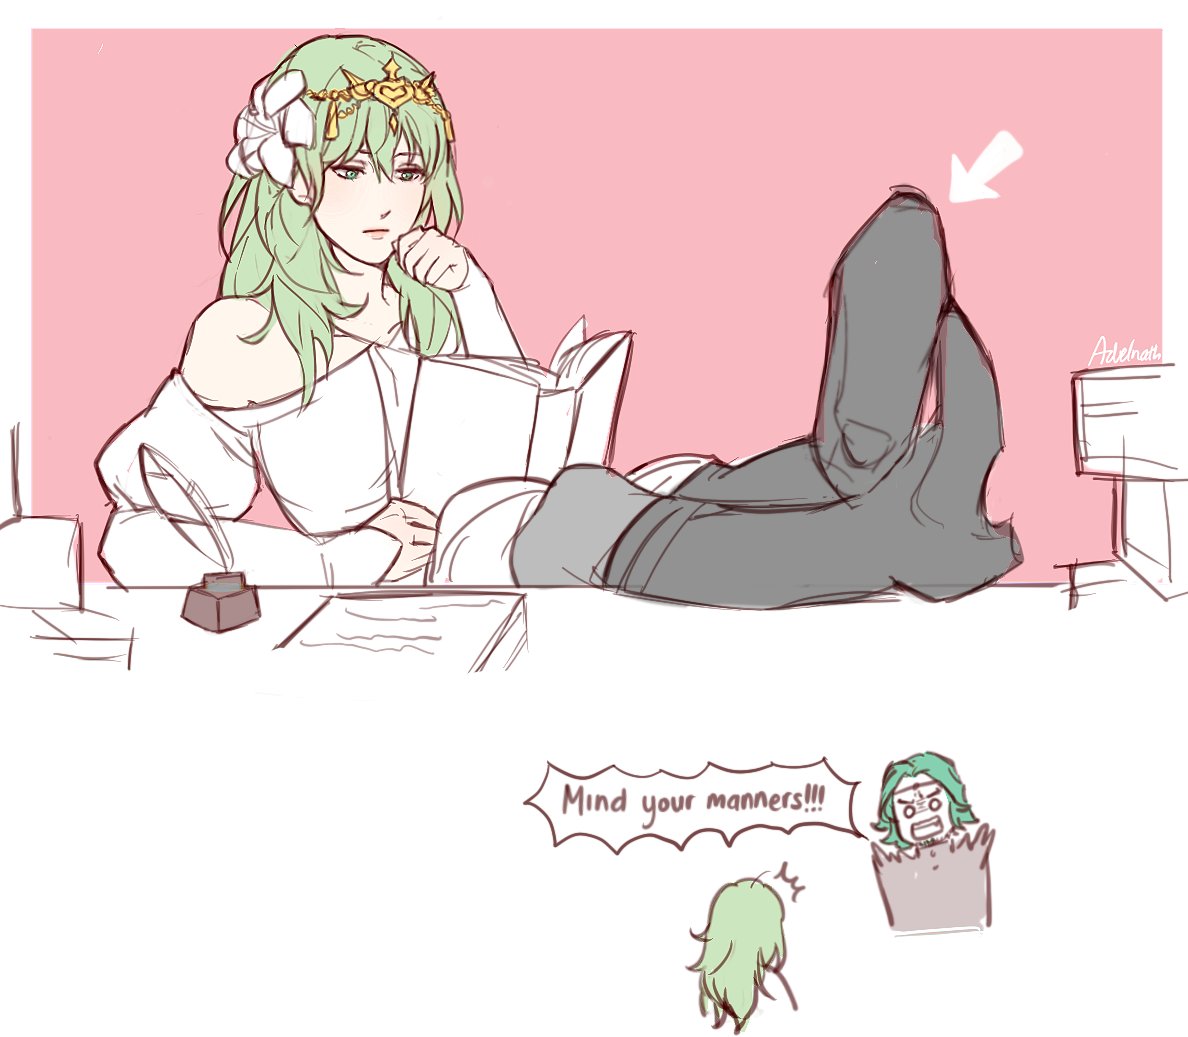 The new archbishop vs. her outfit (ft. her secretary)
#FE3H #Byleth #Seteth 